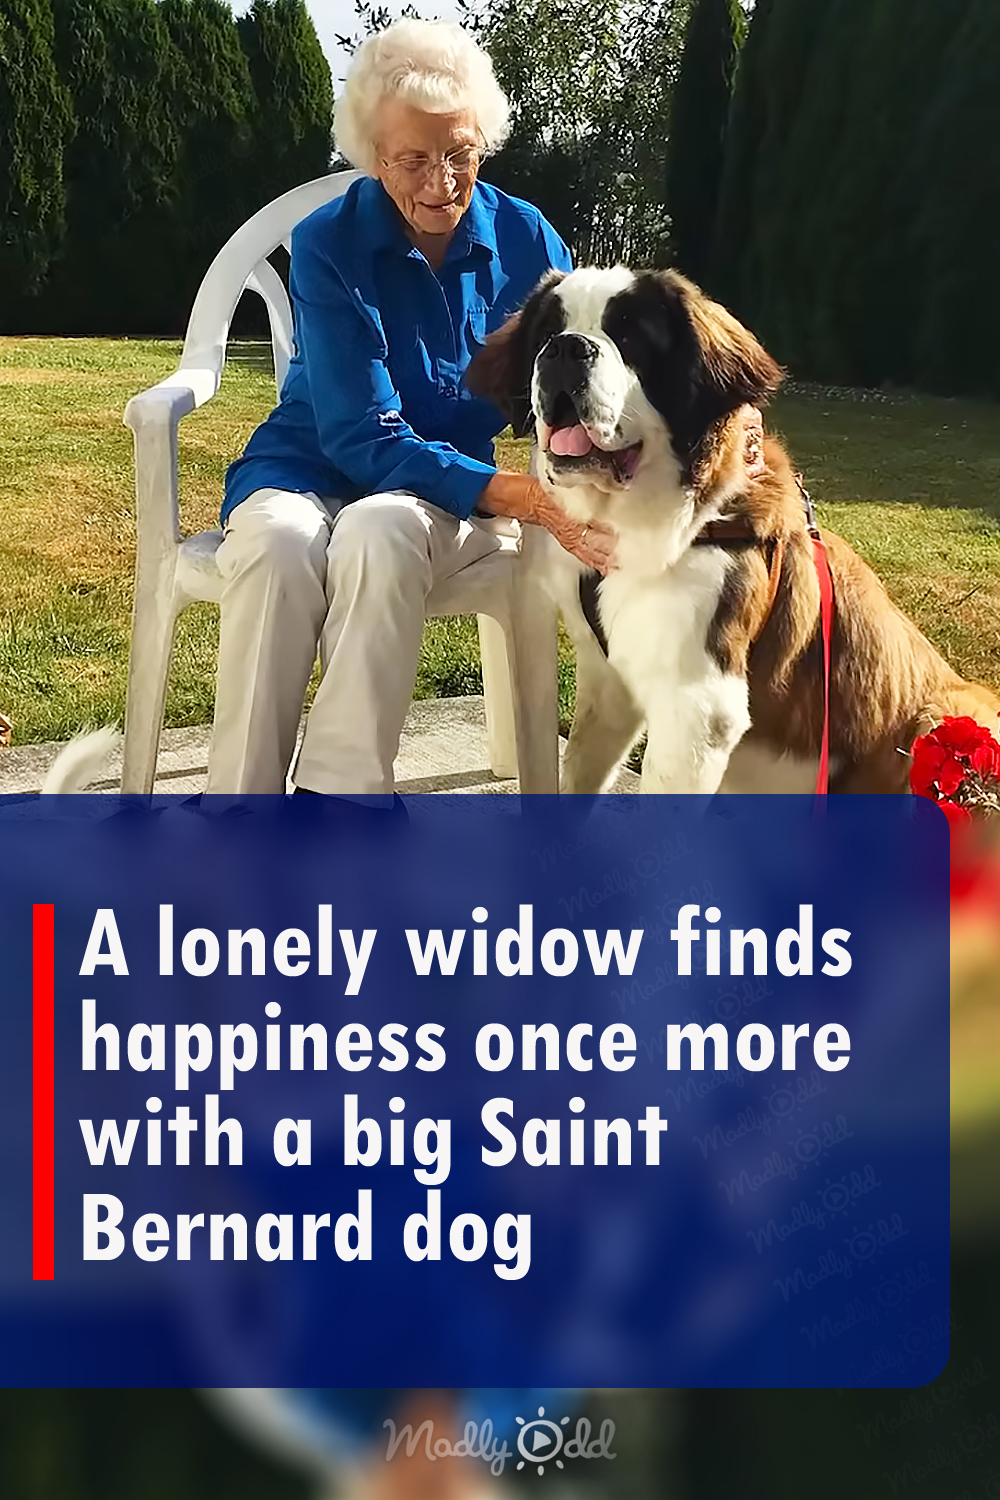 A lonely widow finds happiness once more with a big Saint Bernard dog